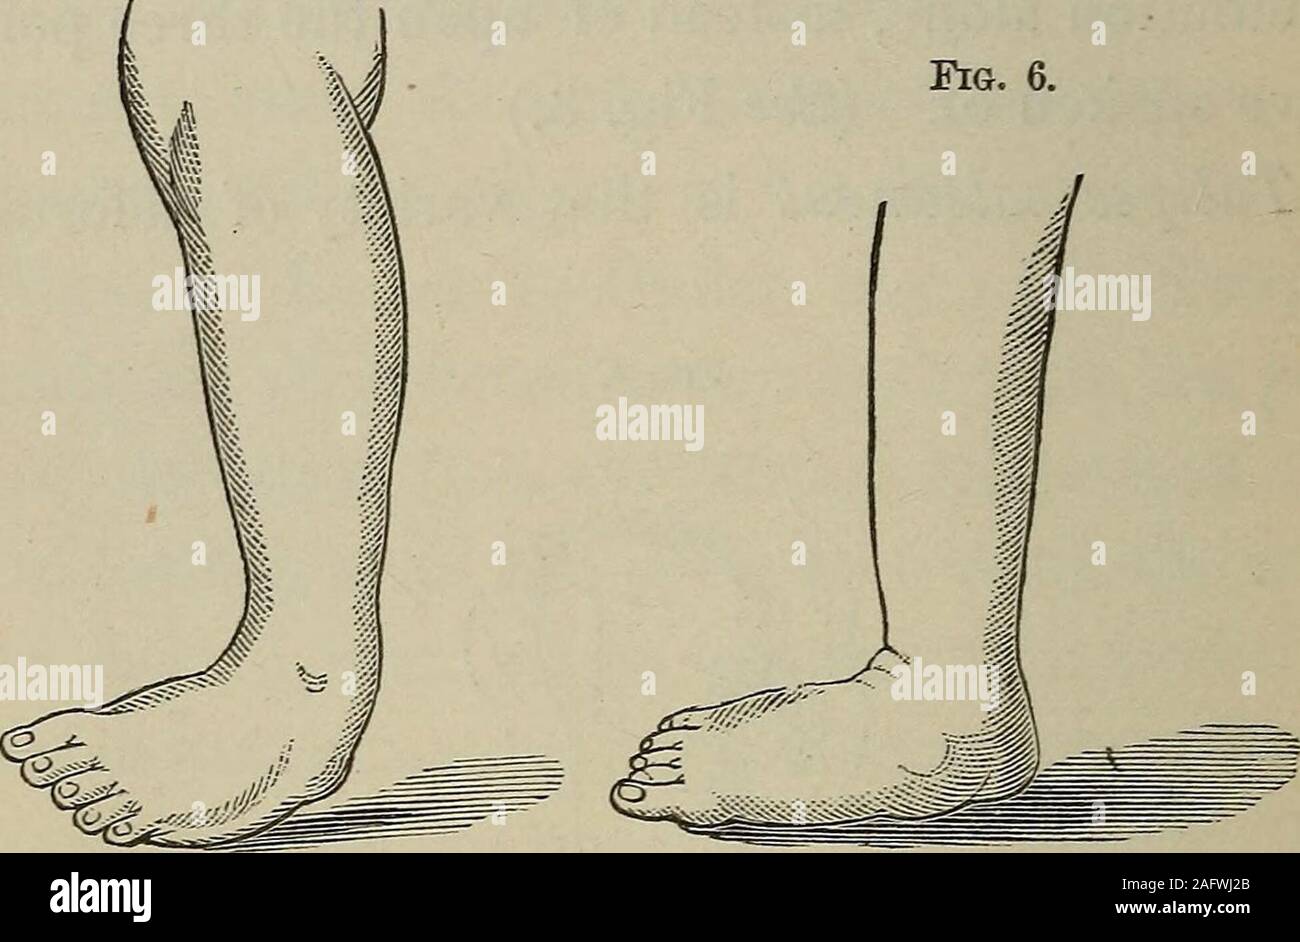 A Practical Manual Of The Treatment Of Club Foot Talipes Calcaneus Where The Anterior Portion Of The Foot Is Elevated And The Heel Touches The Ground See Fig 4 In Talipes Varus The